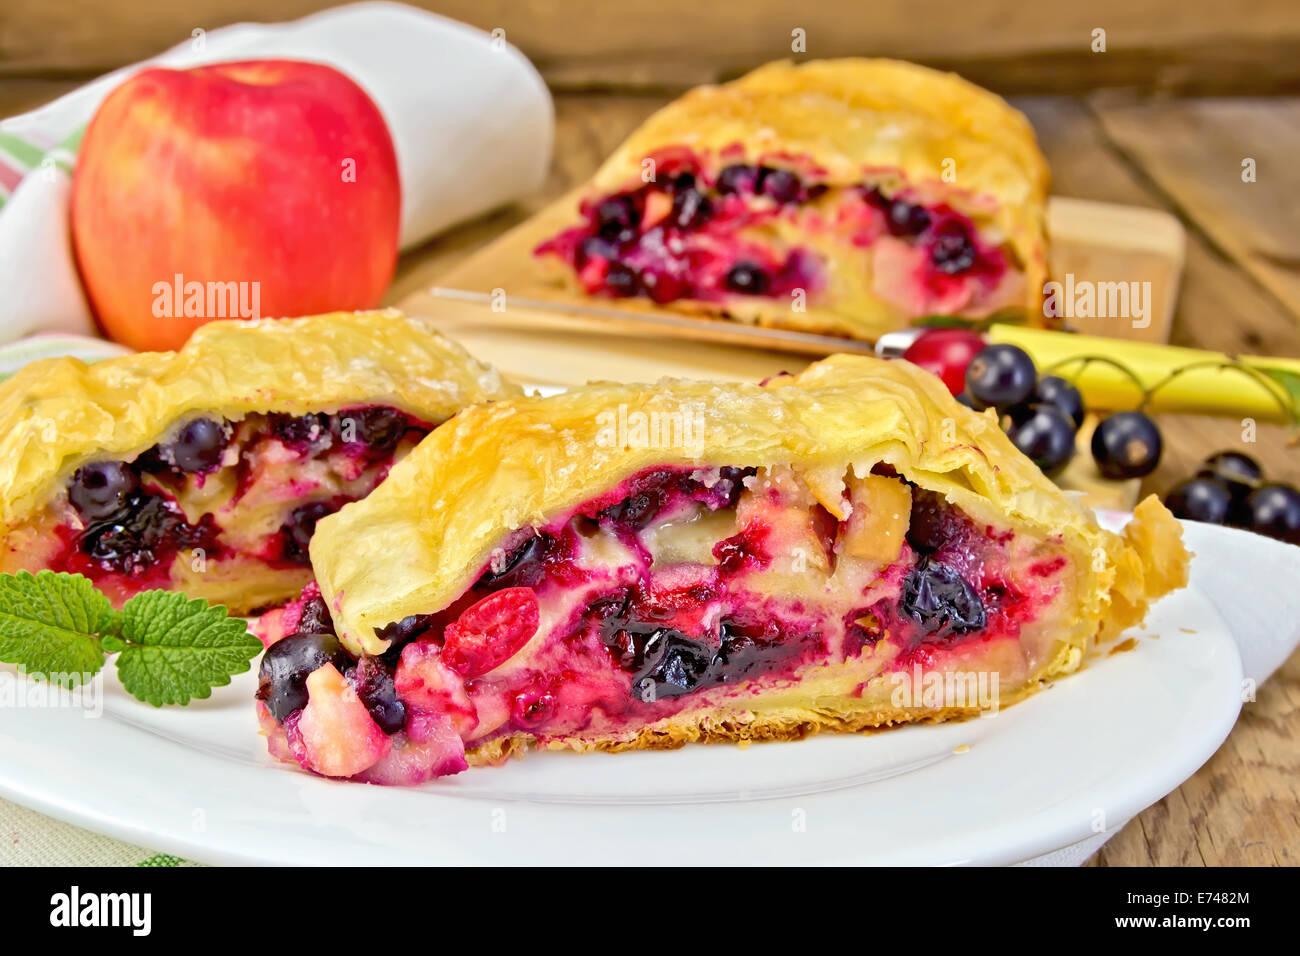 Strudel with black currant, apple and cherry on a plate, napkin, apple on the background of wooden boards Stock Photo